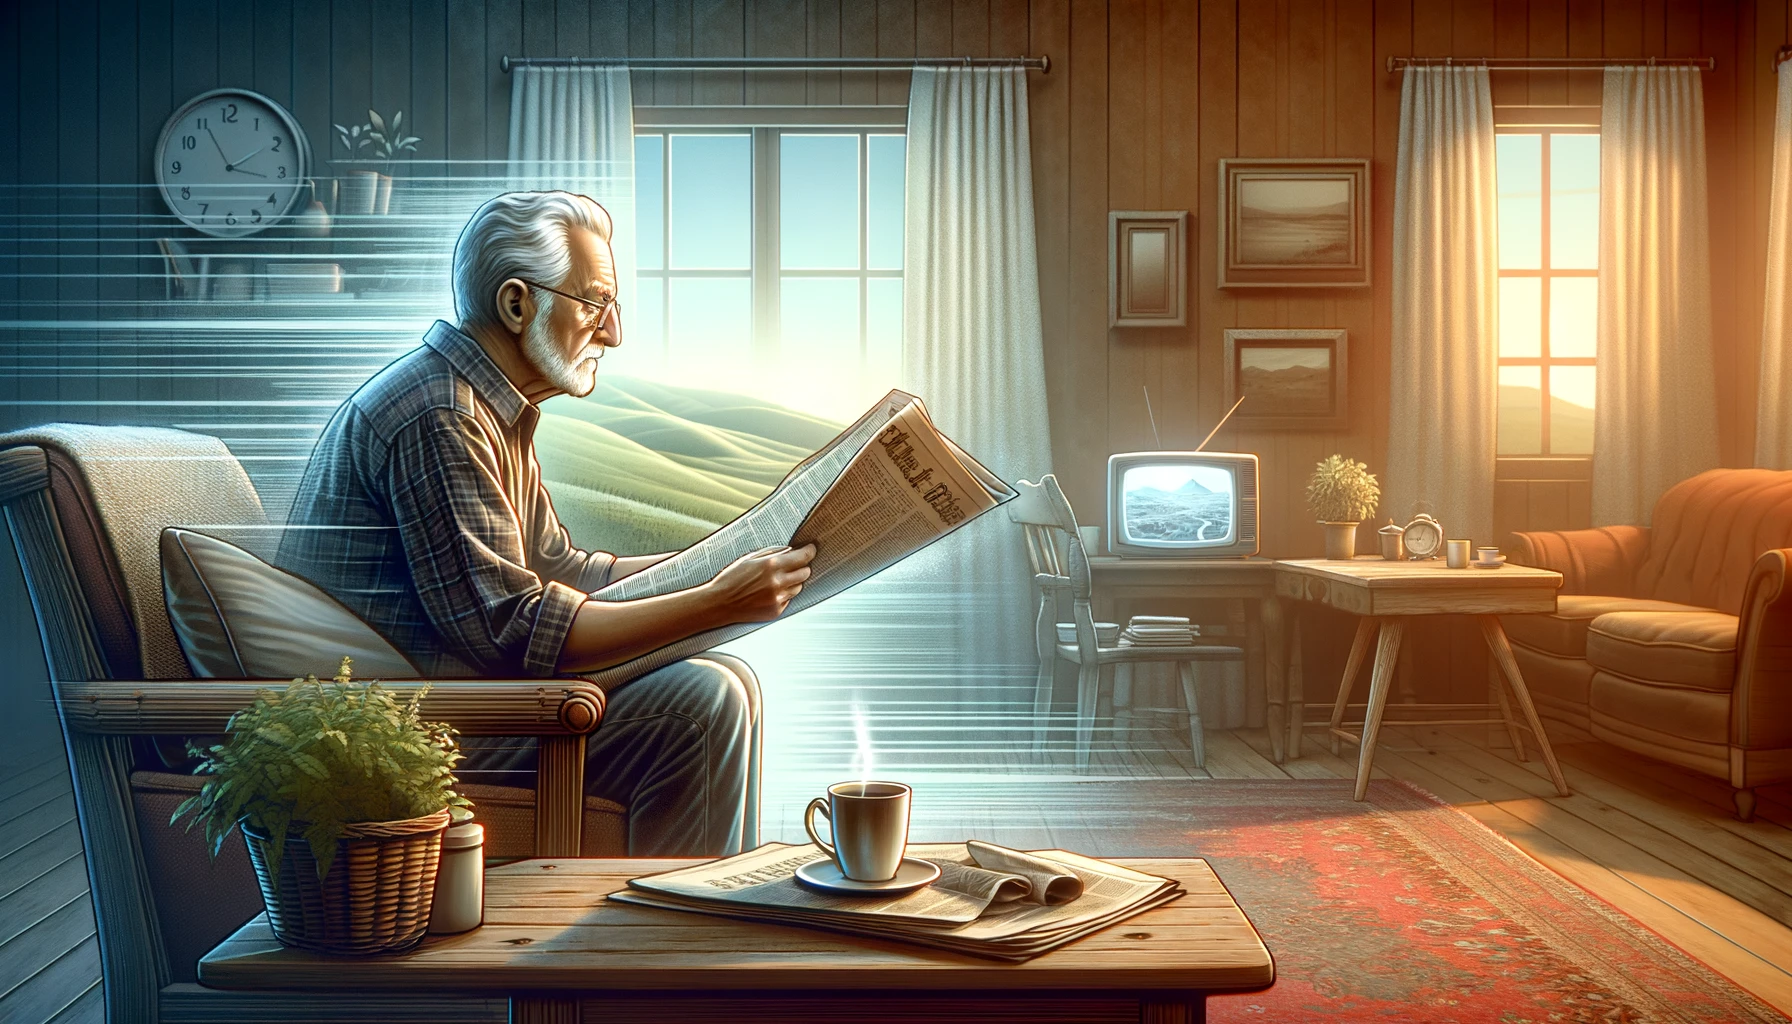 dall_e_2024-04-23_10_37_54_an_illustration_depicting_an_elderly_man_in_a_cozy_home_environment_reading_a_traditional_newspaper_with_a_cup_of_coffee_beside_him_evoking_a_sense.webp